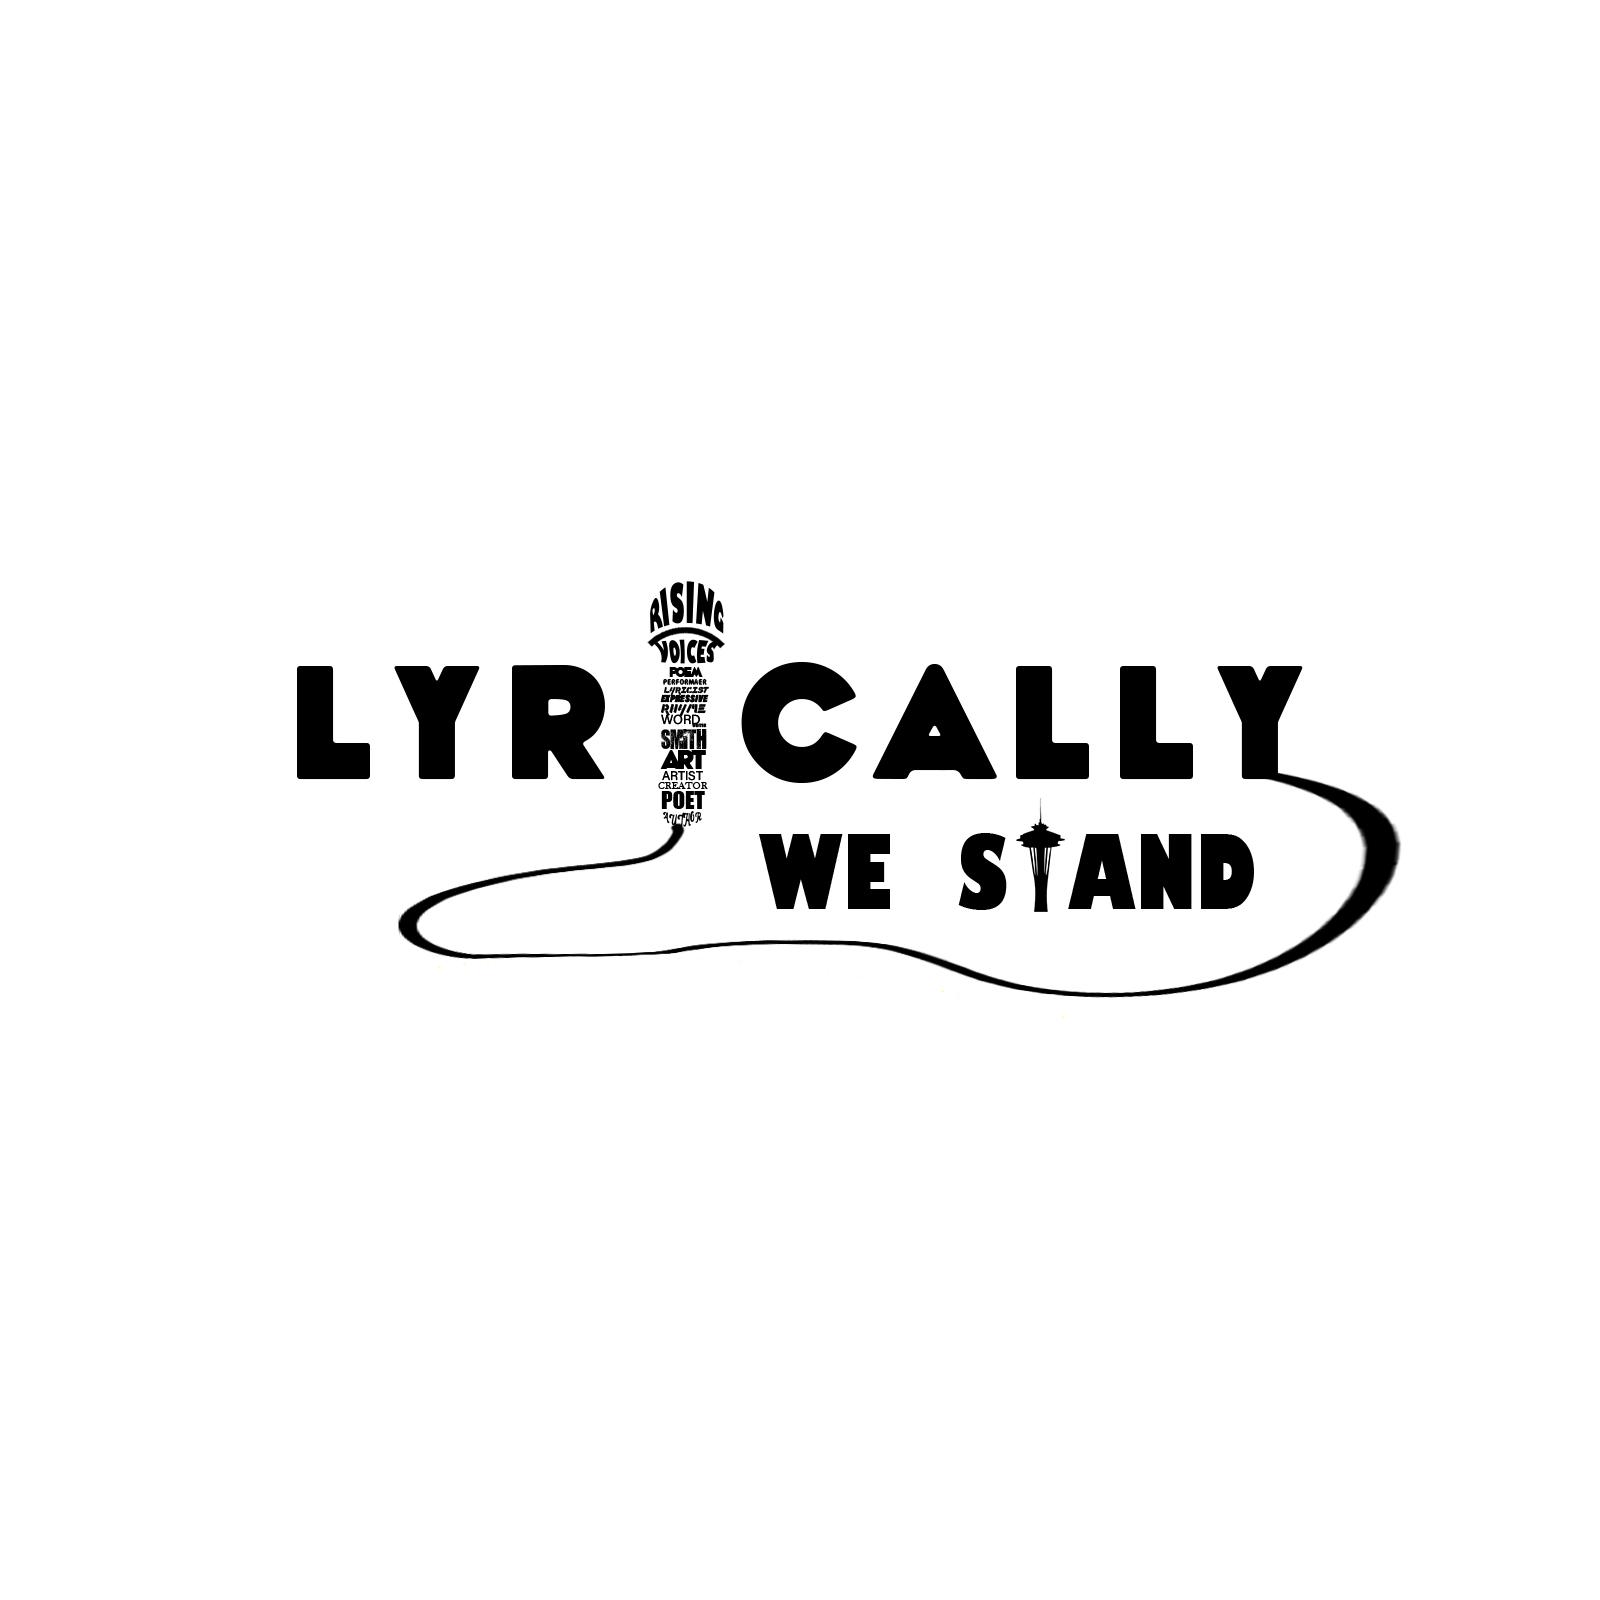 LyricallyWEstand is showcasing verbal talent's in our community!!!